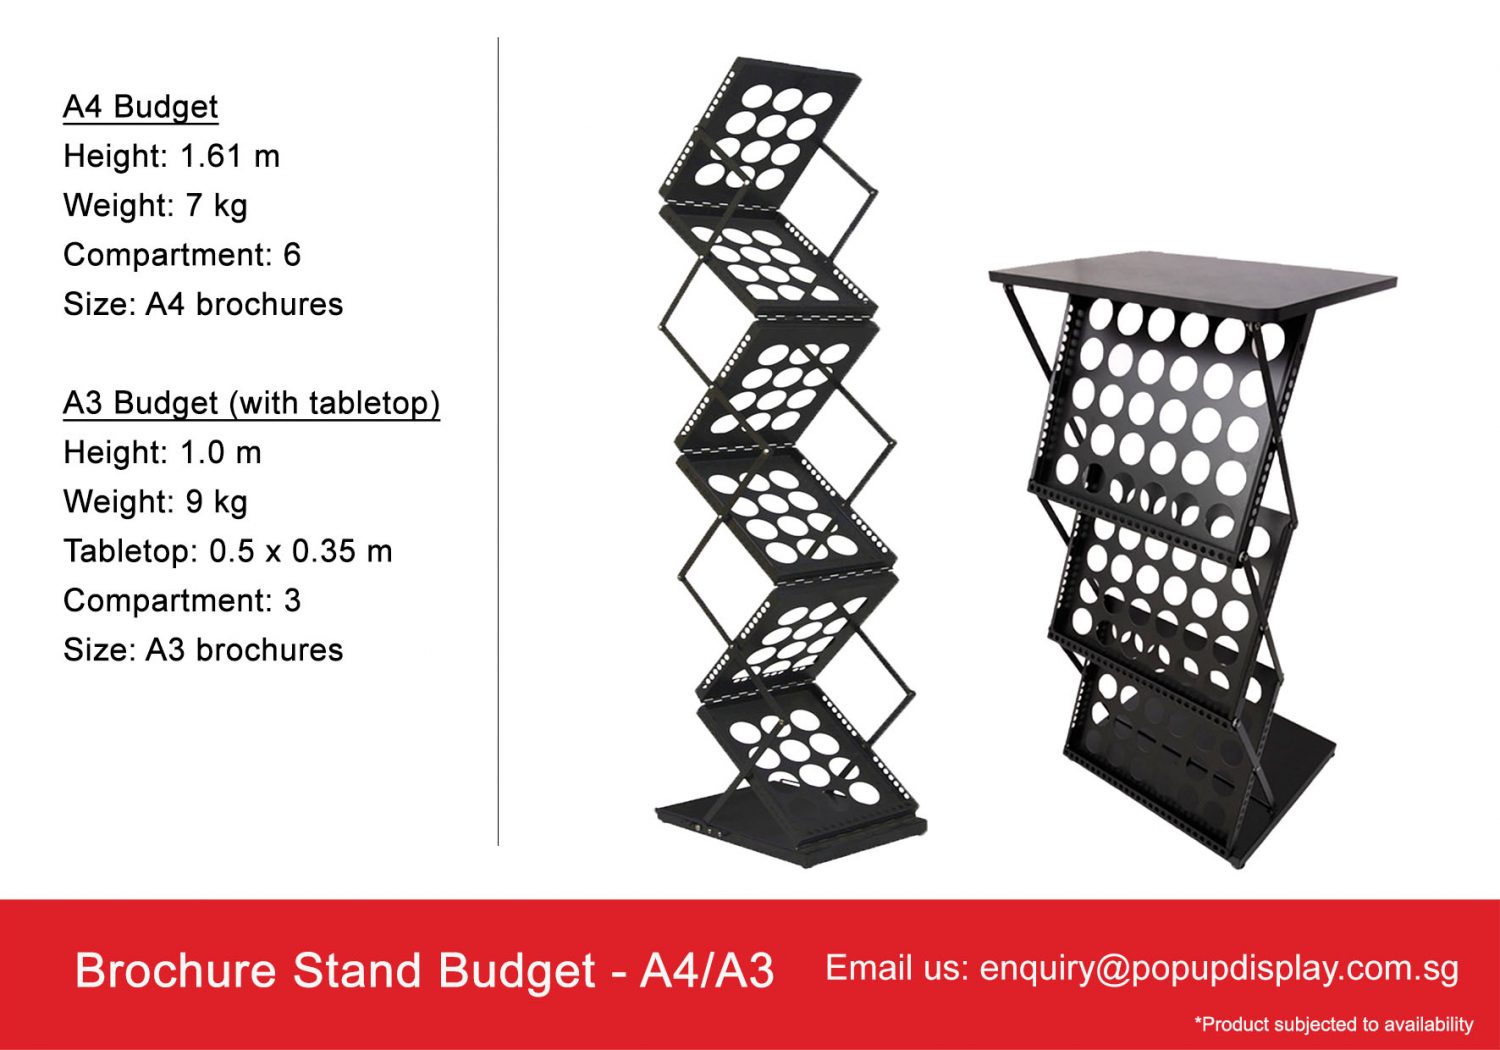 Budget Brochure Stand